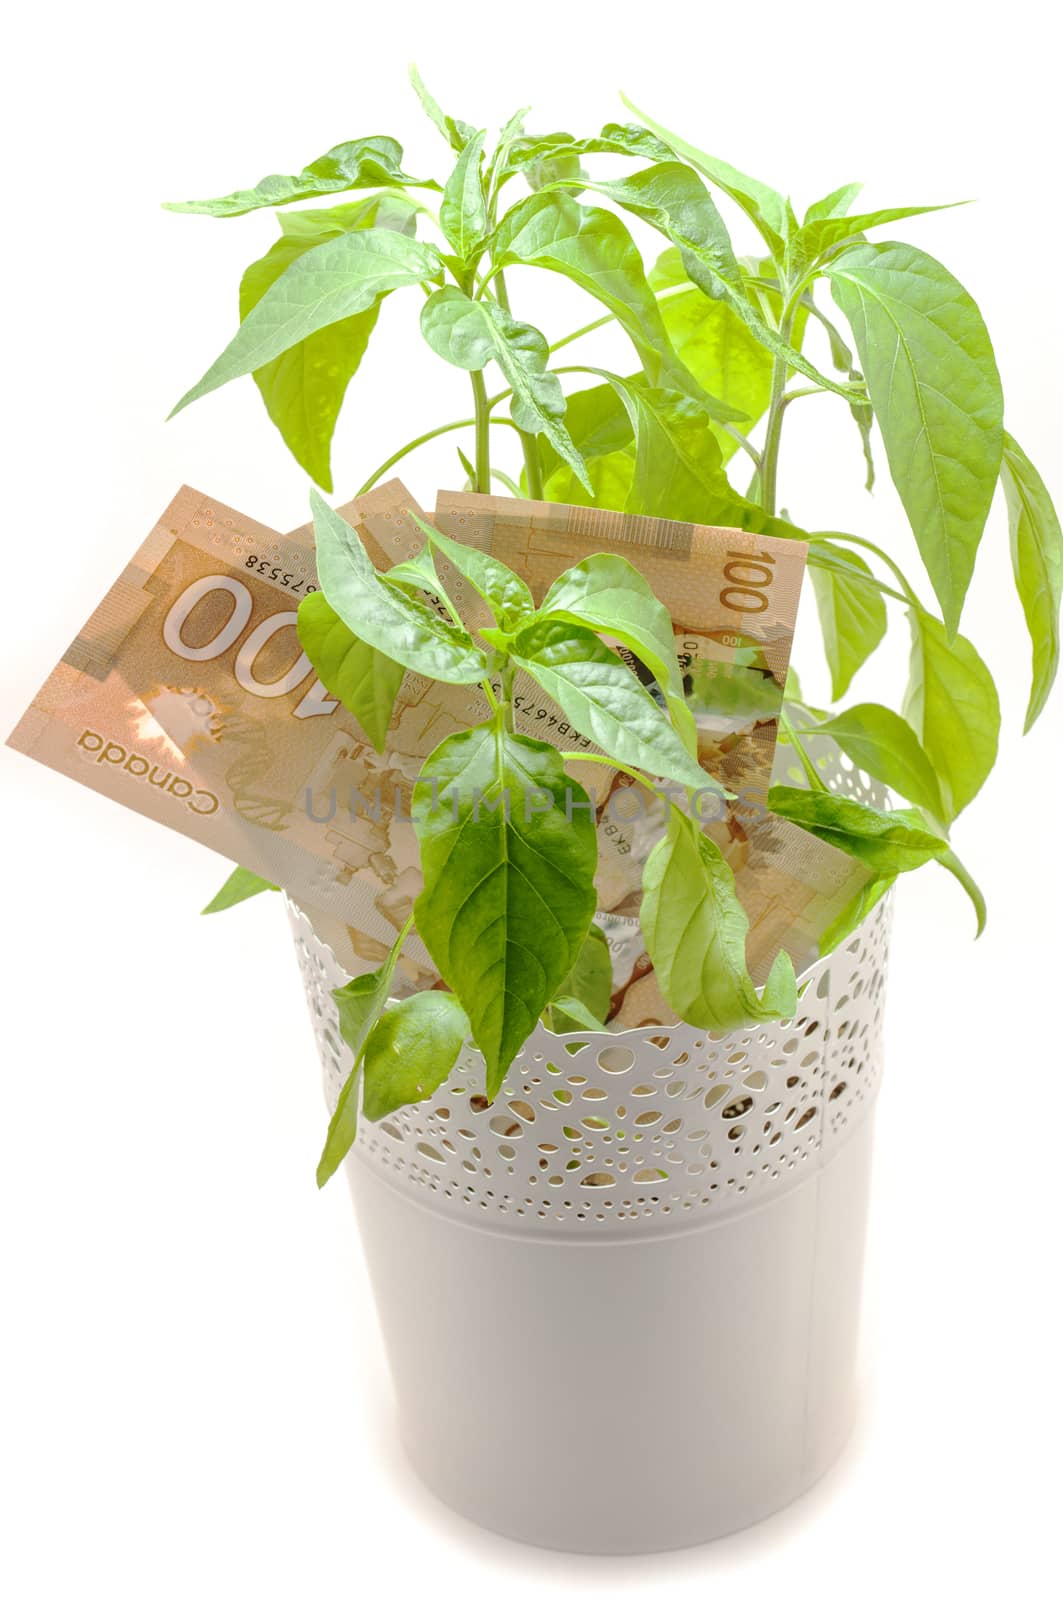 Hundred Canadian dollar bill and a green plant by daoleduc